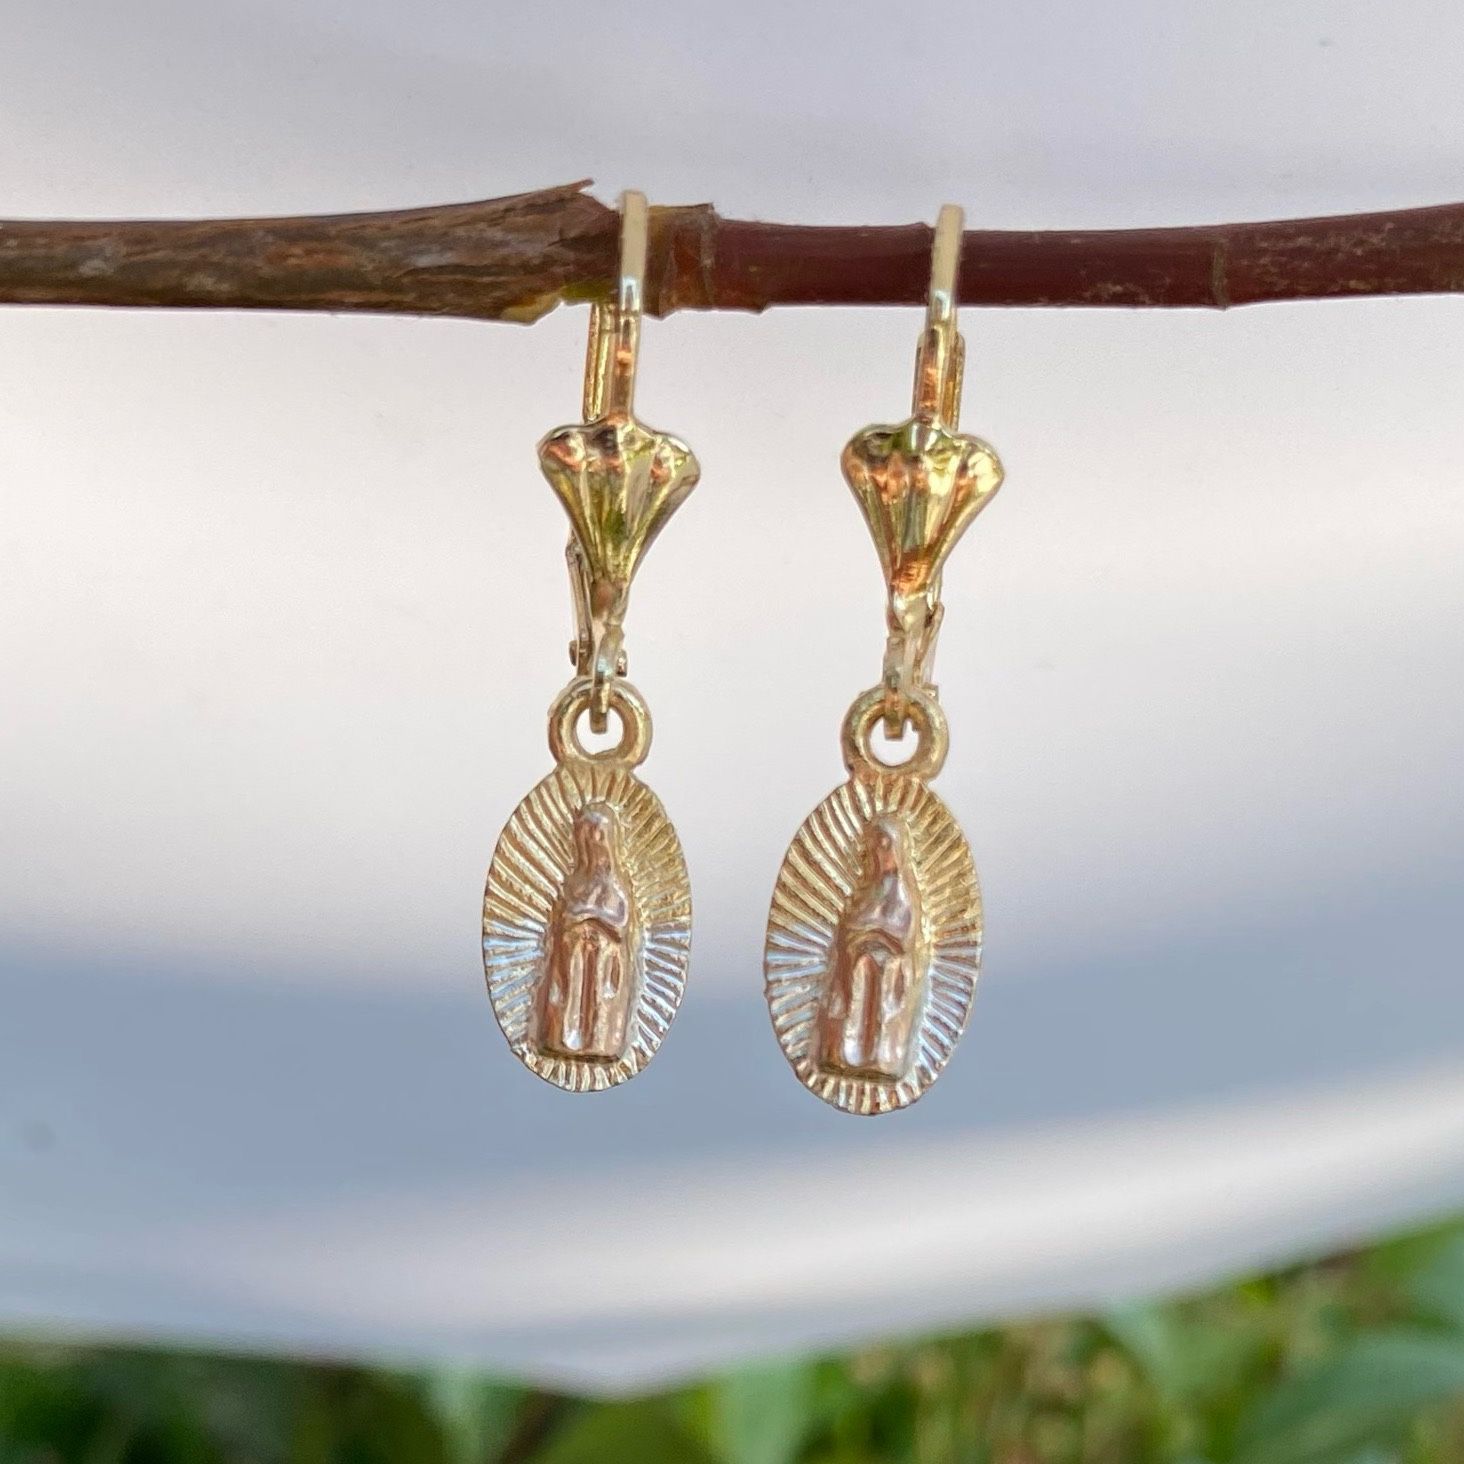 Dainty Virgin of Guadalupe Earrings Gold Plated Oro laminado Aretes Virgen  for Sale in Culver City, CA - OfferUp